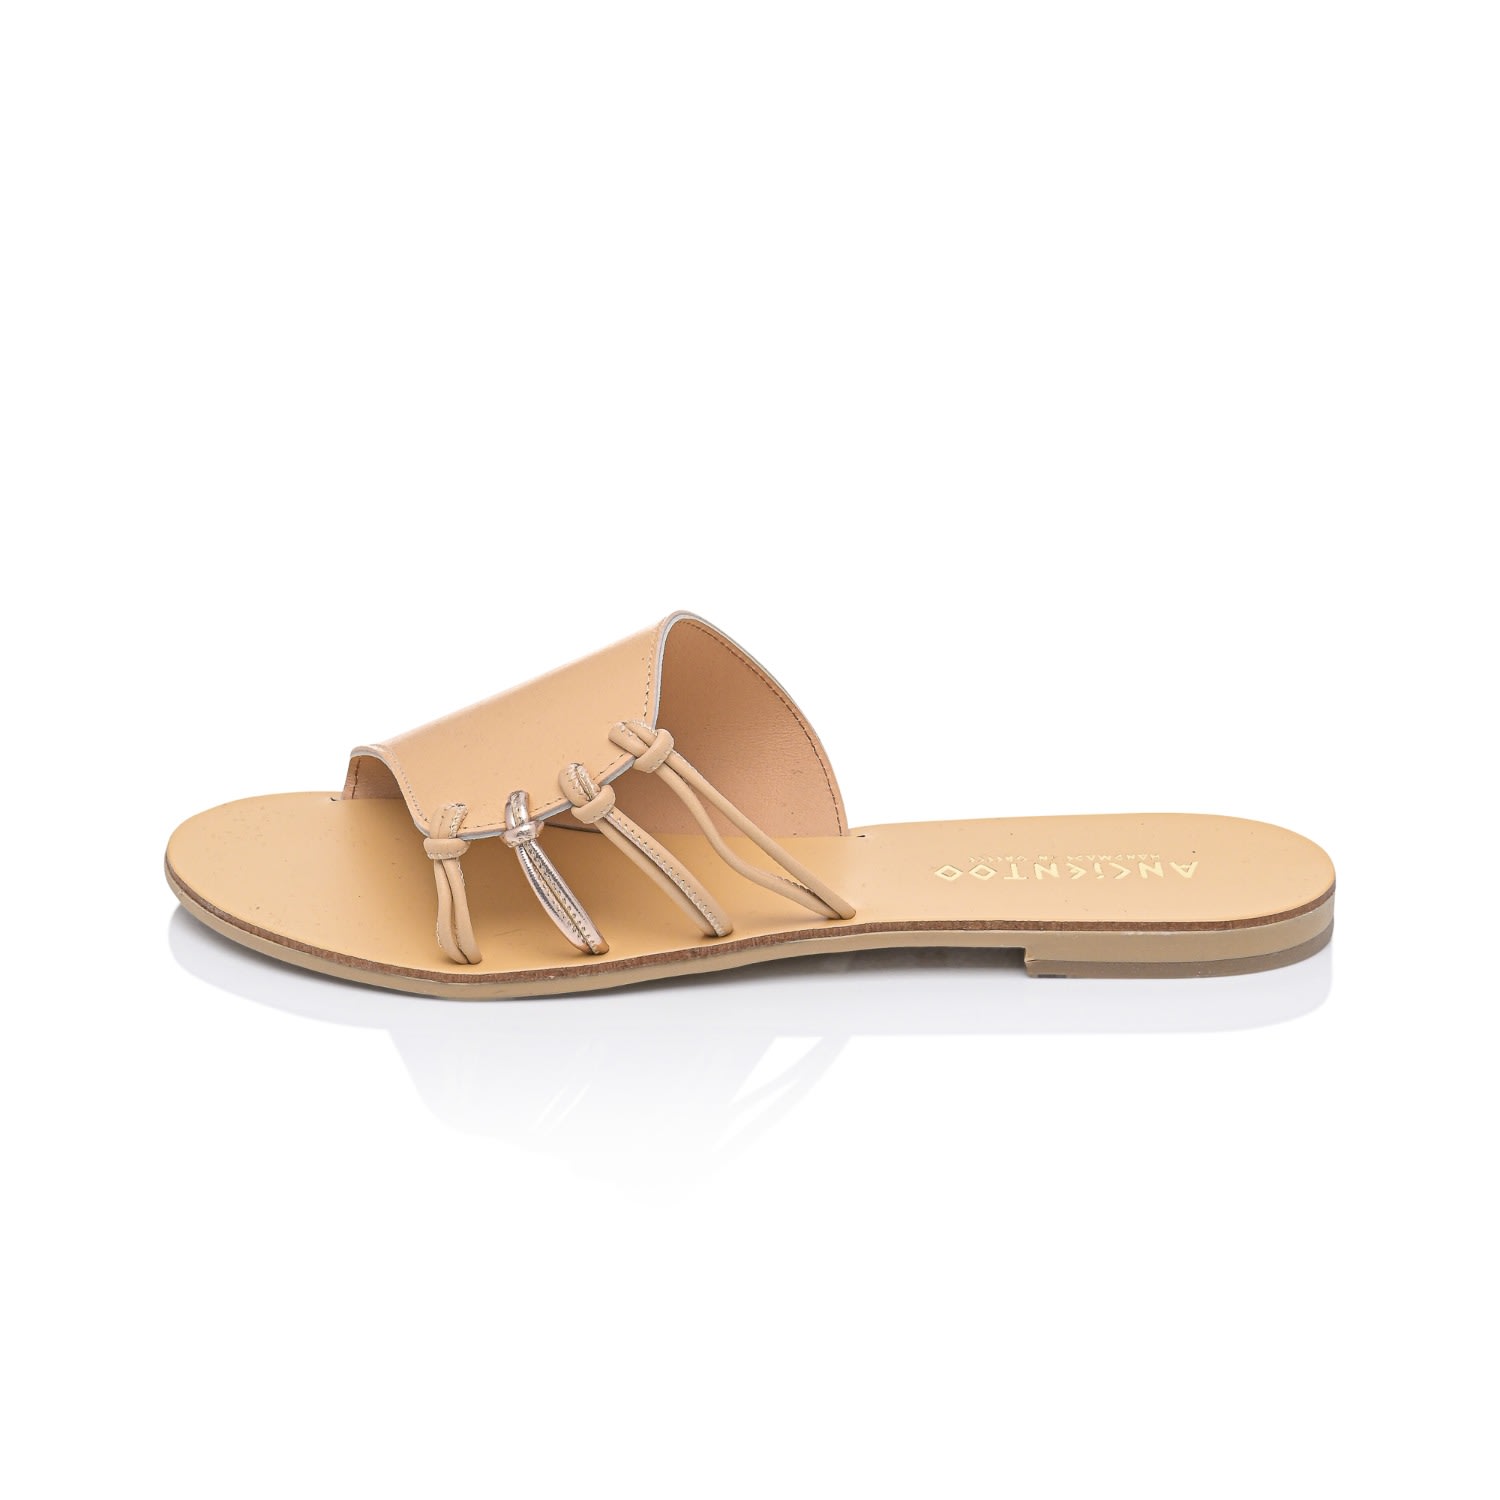 Ancientoo Neutrals Athena Handcrafted Women's Slide Sandals With Solid Leather Covering Tethered With Cords Tr In Brown